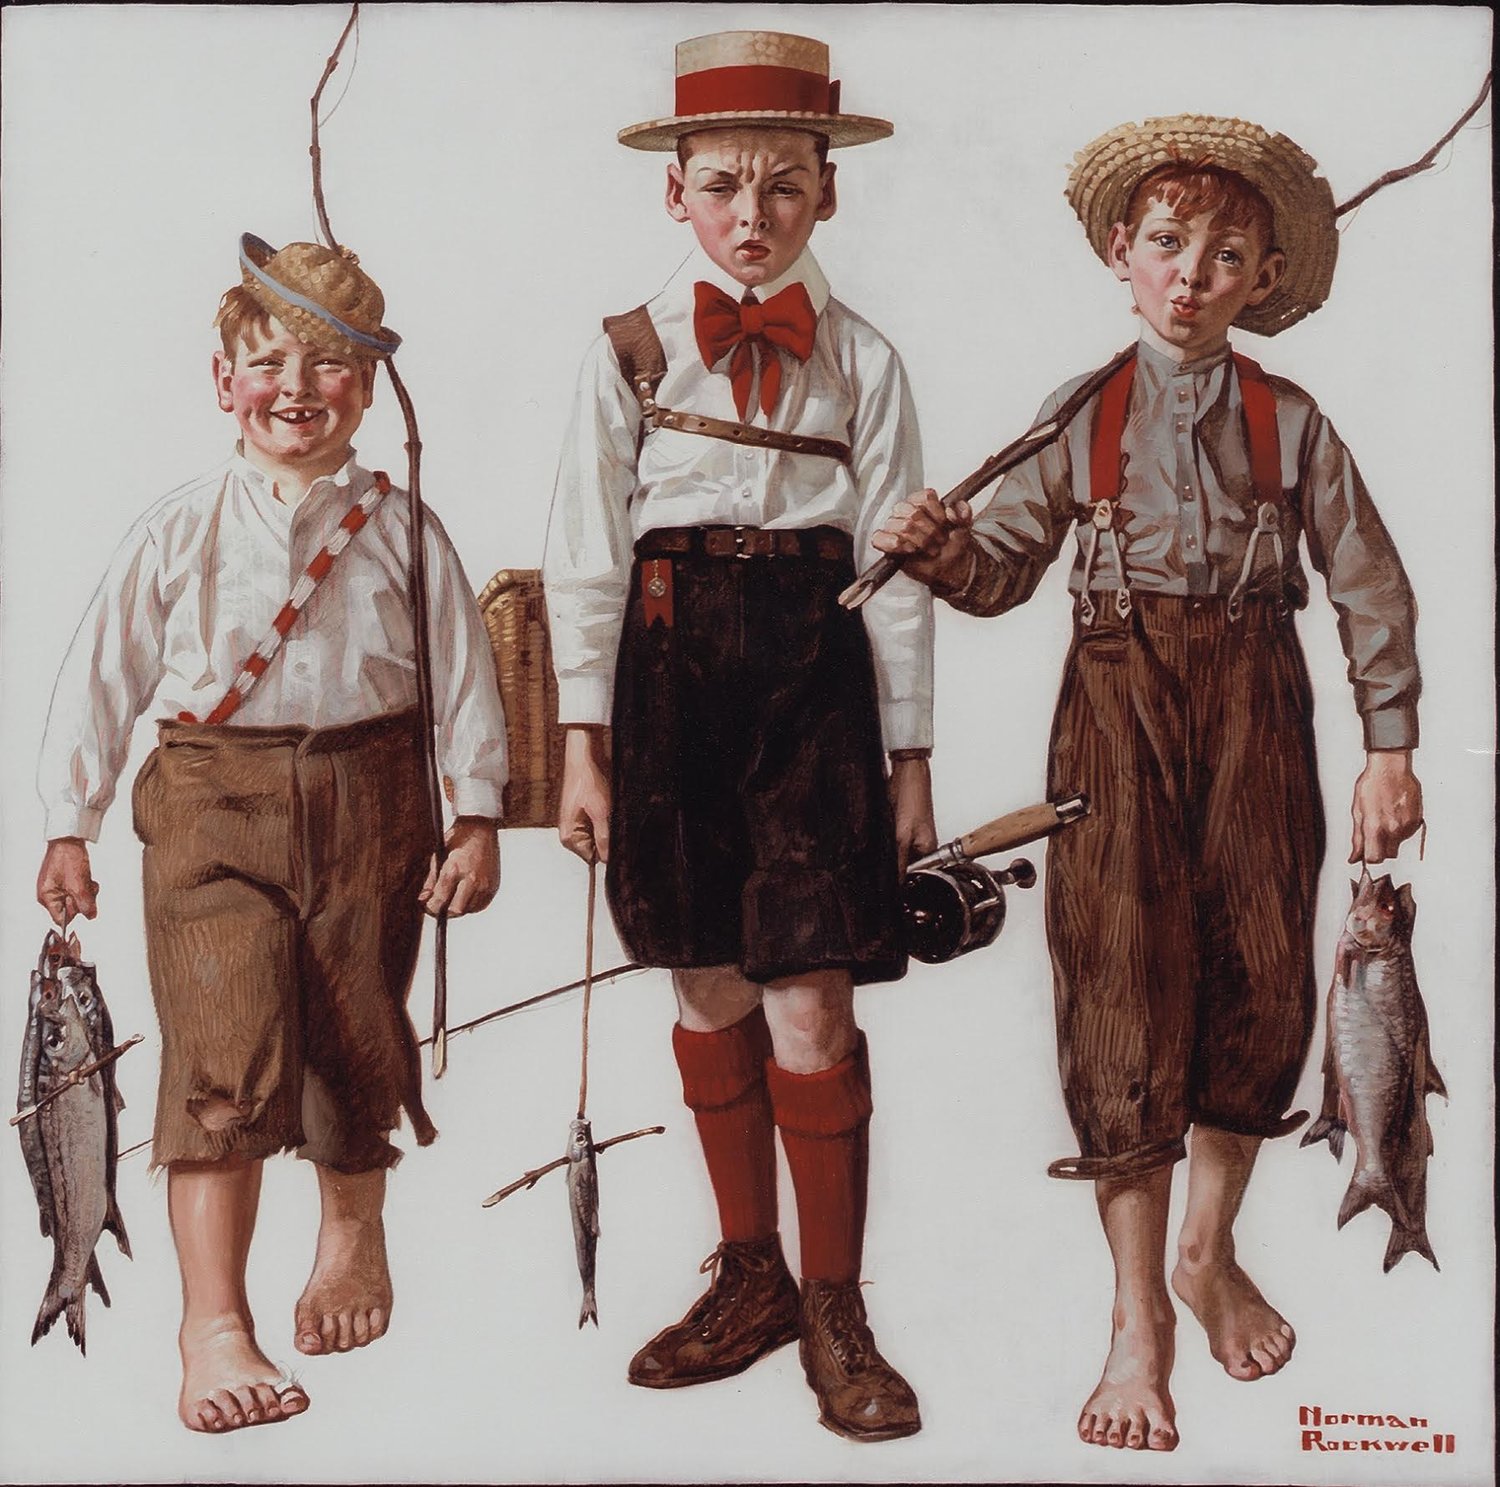 “The Catch” by NormaN Rockwell